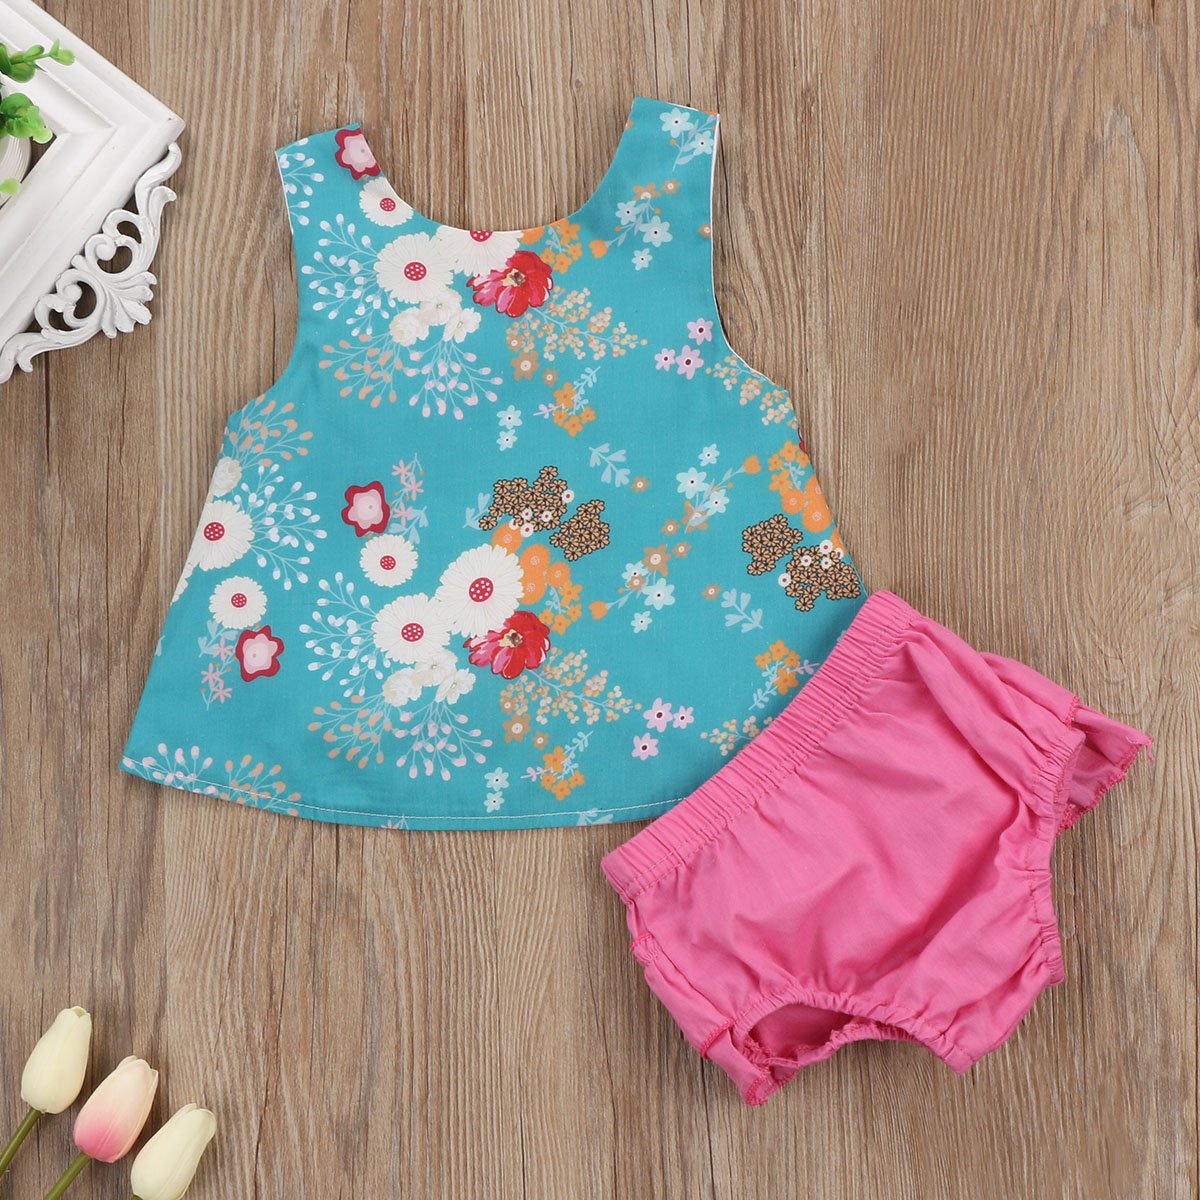 Blooming Babe: Adorable Newborn Baby Girl Outfit with Flower Print Vest Tops and Tutu Shorts